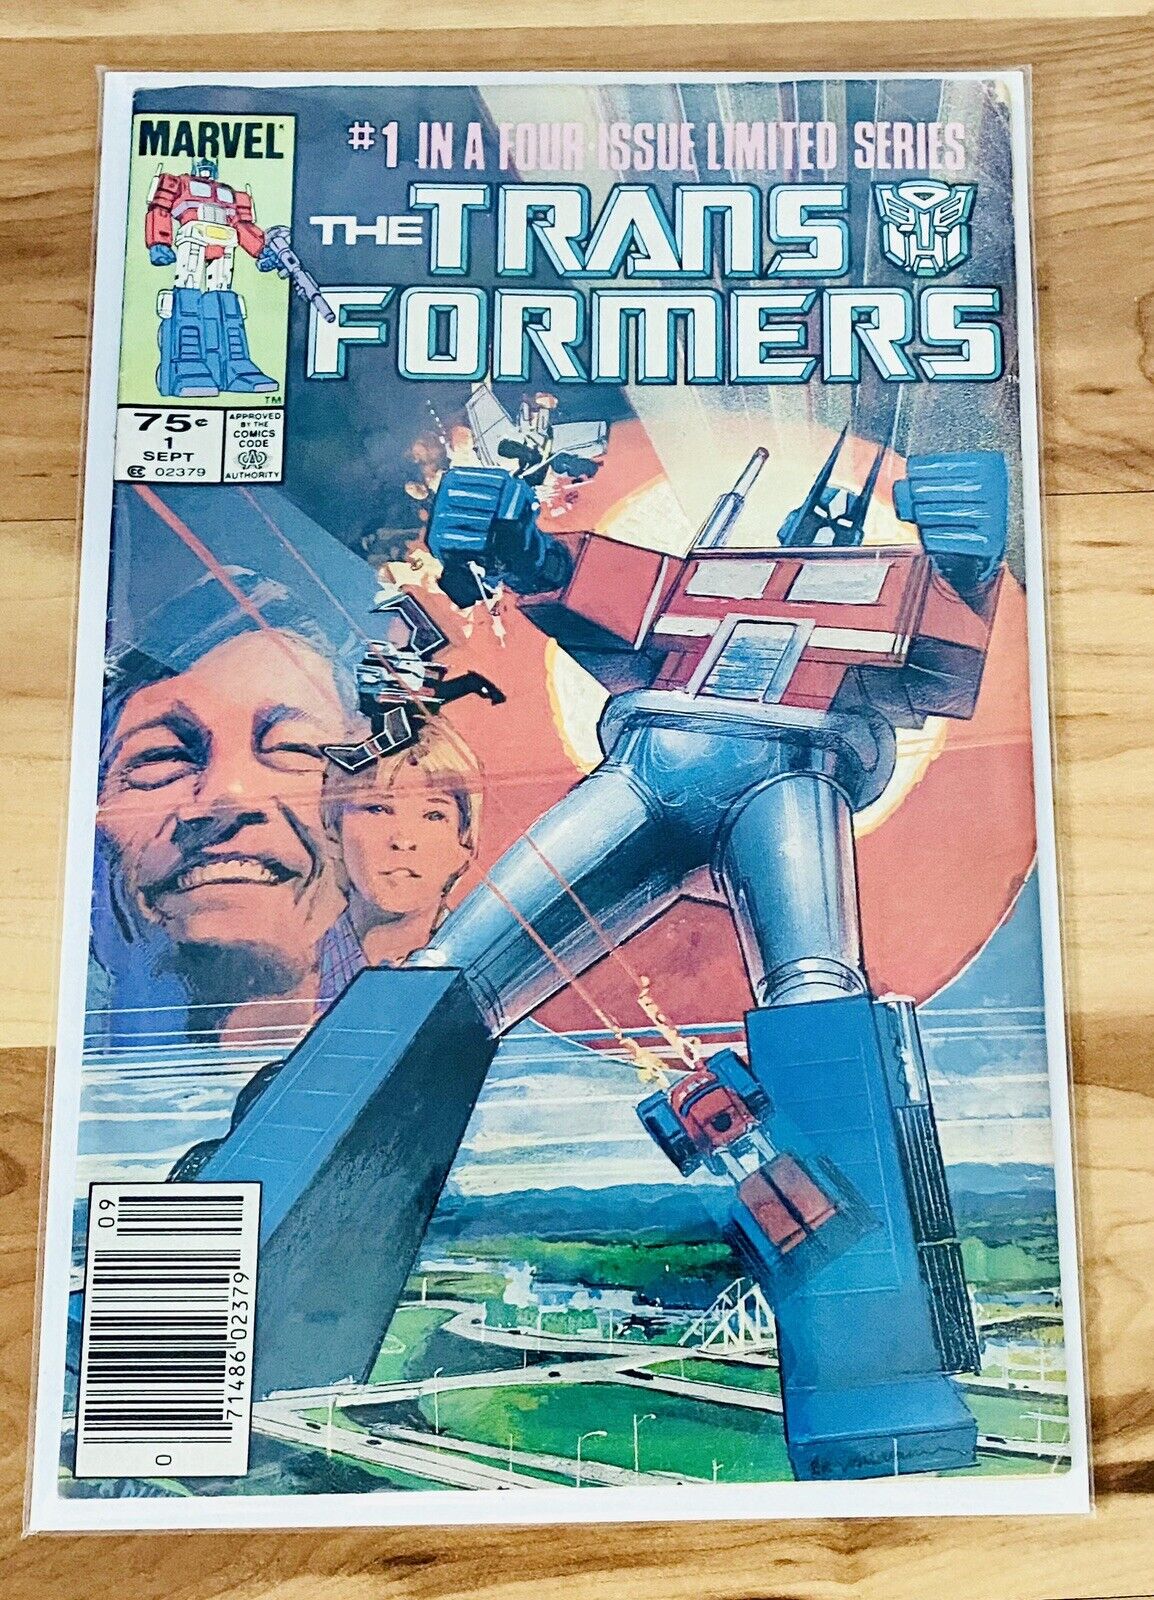 Marvel Comics The Transformers Issue #1 Volume 1 September 1984 First Print Rare